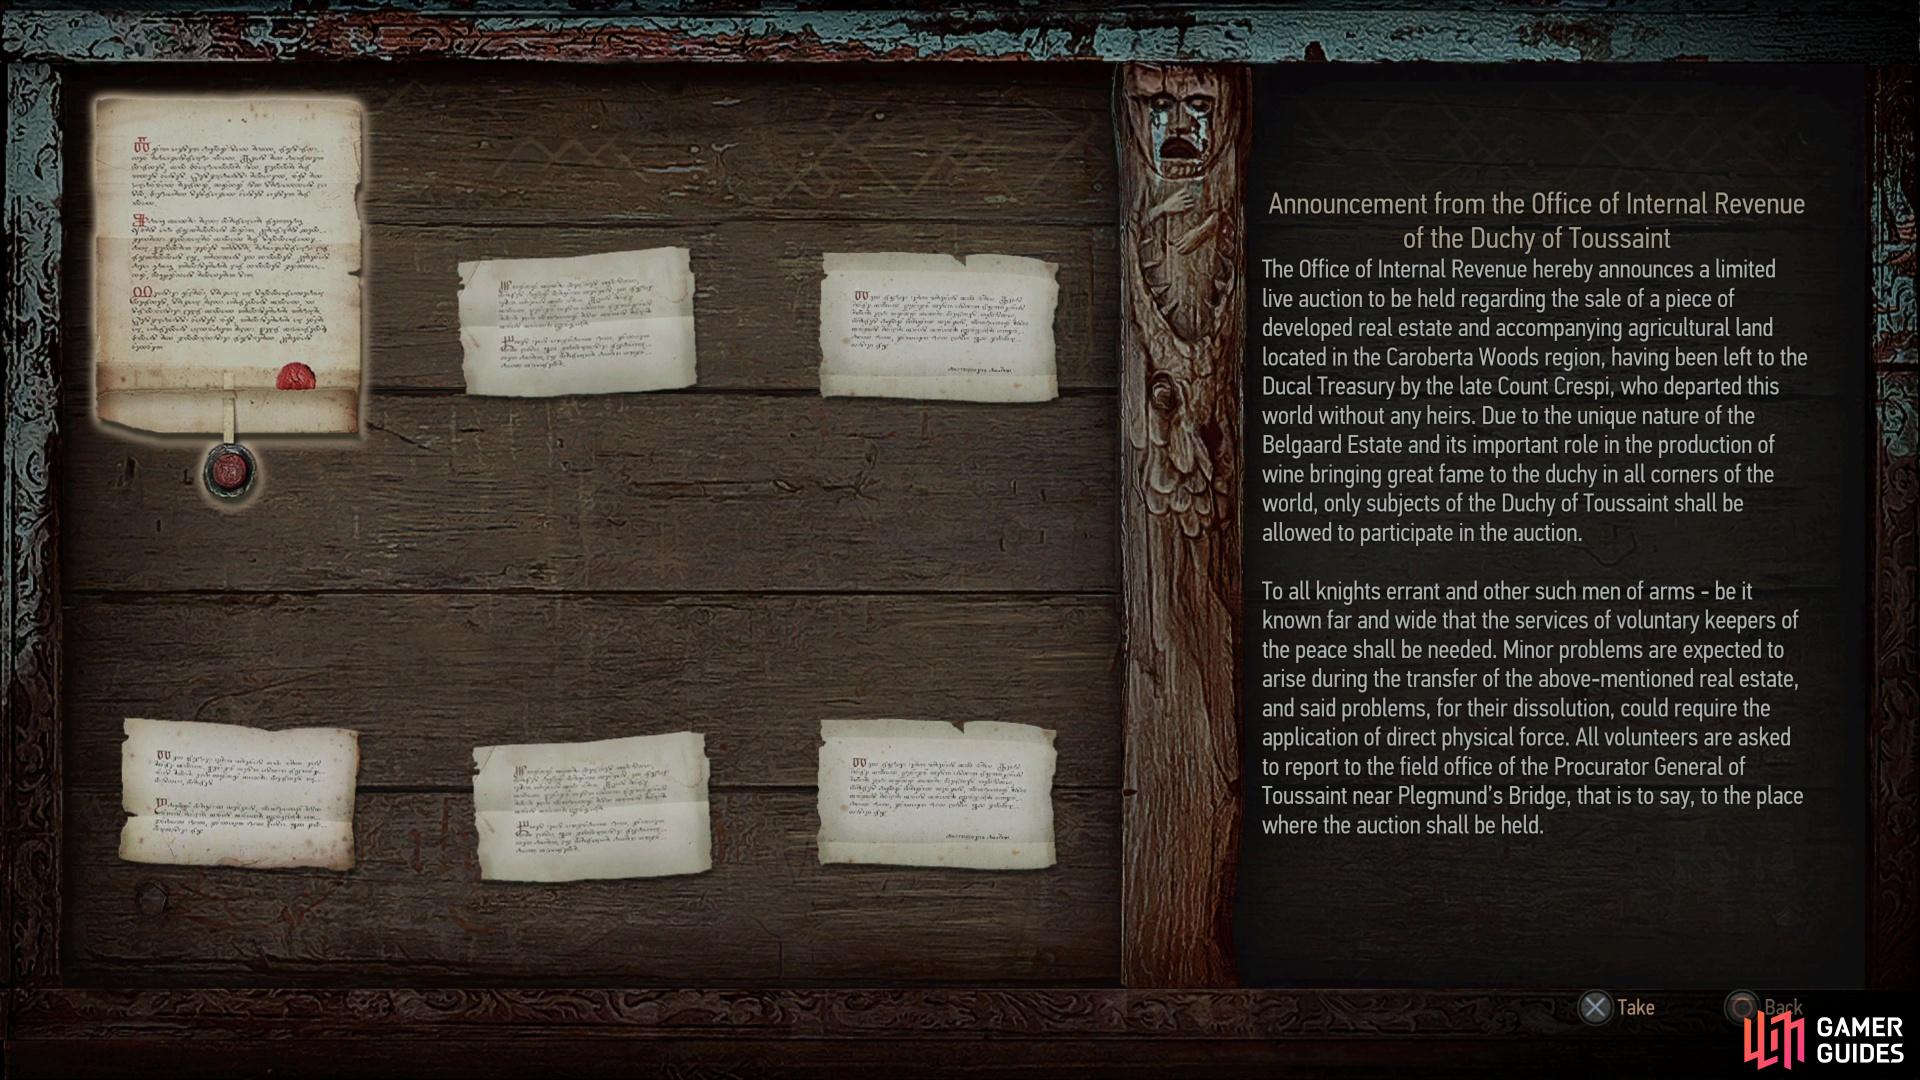 You can start this quest by grabbing the notice from almost any notice board in Toussaint.